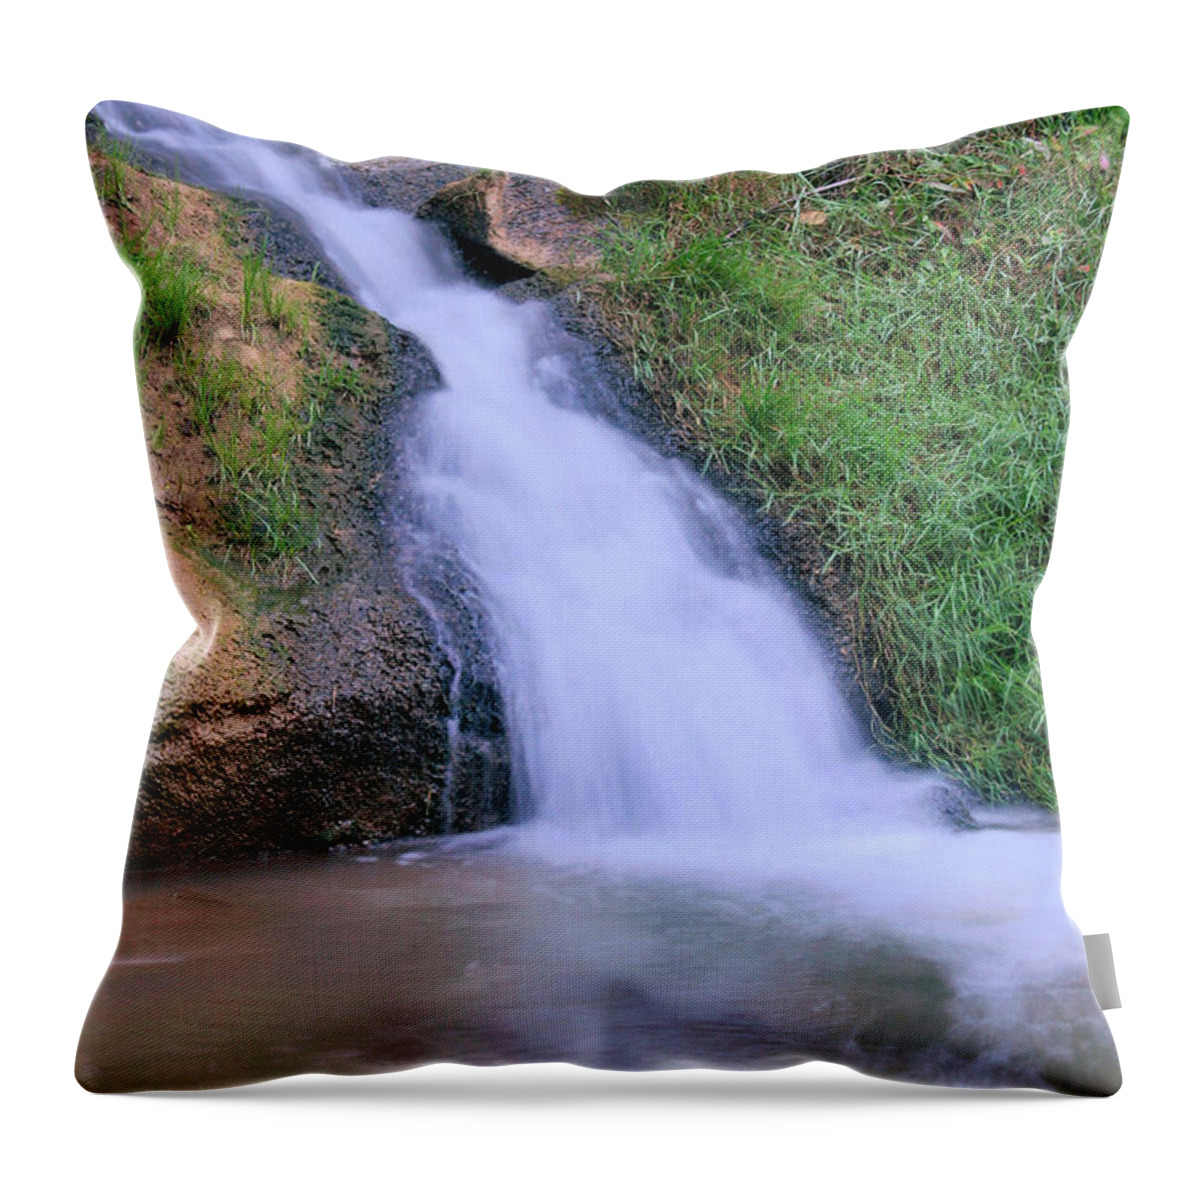 Waterfall Throw Pillow featuring the photograph Gently Flowing by Kristin Elmquist